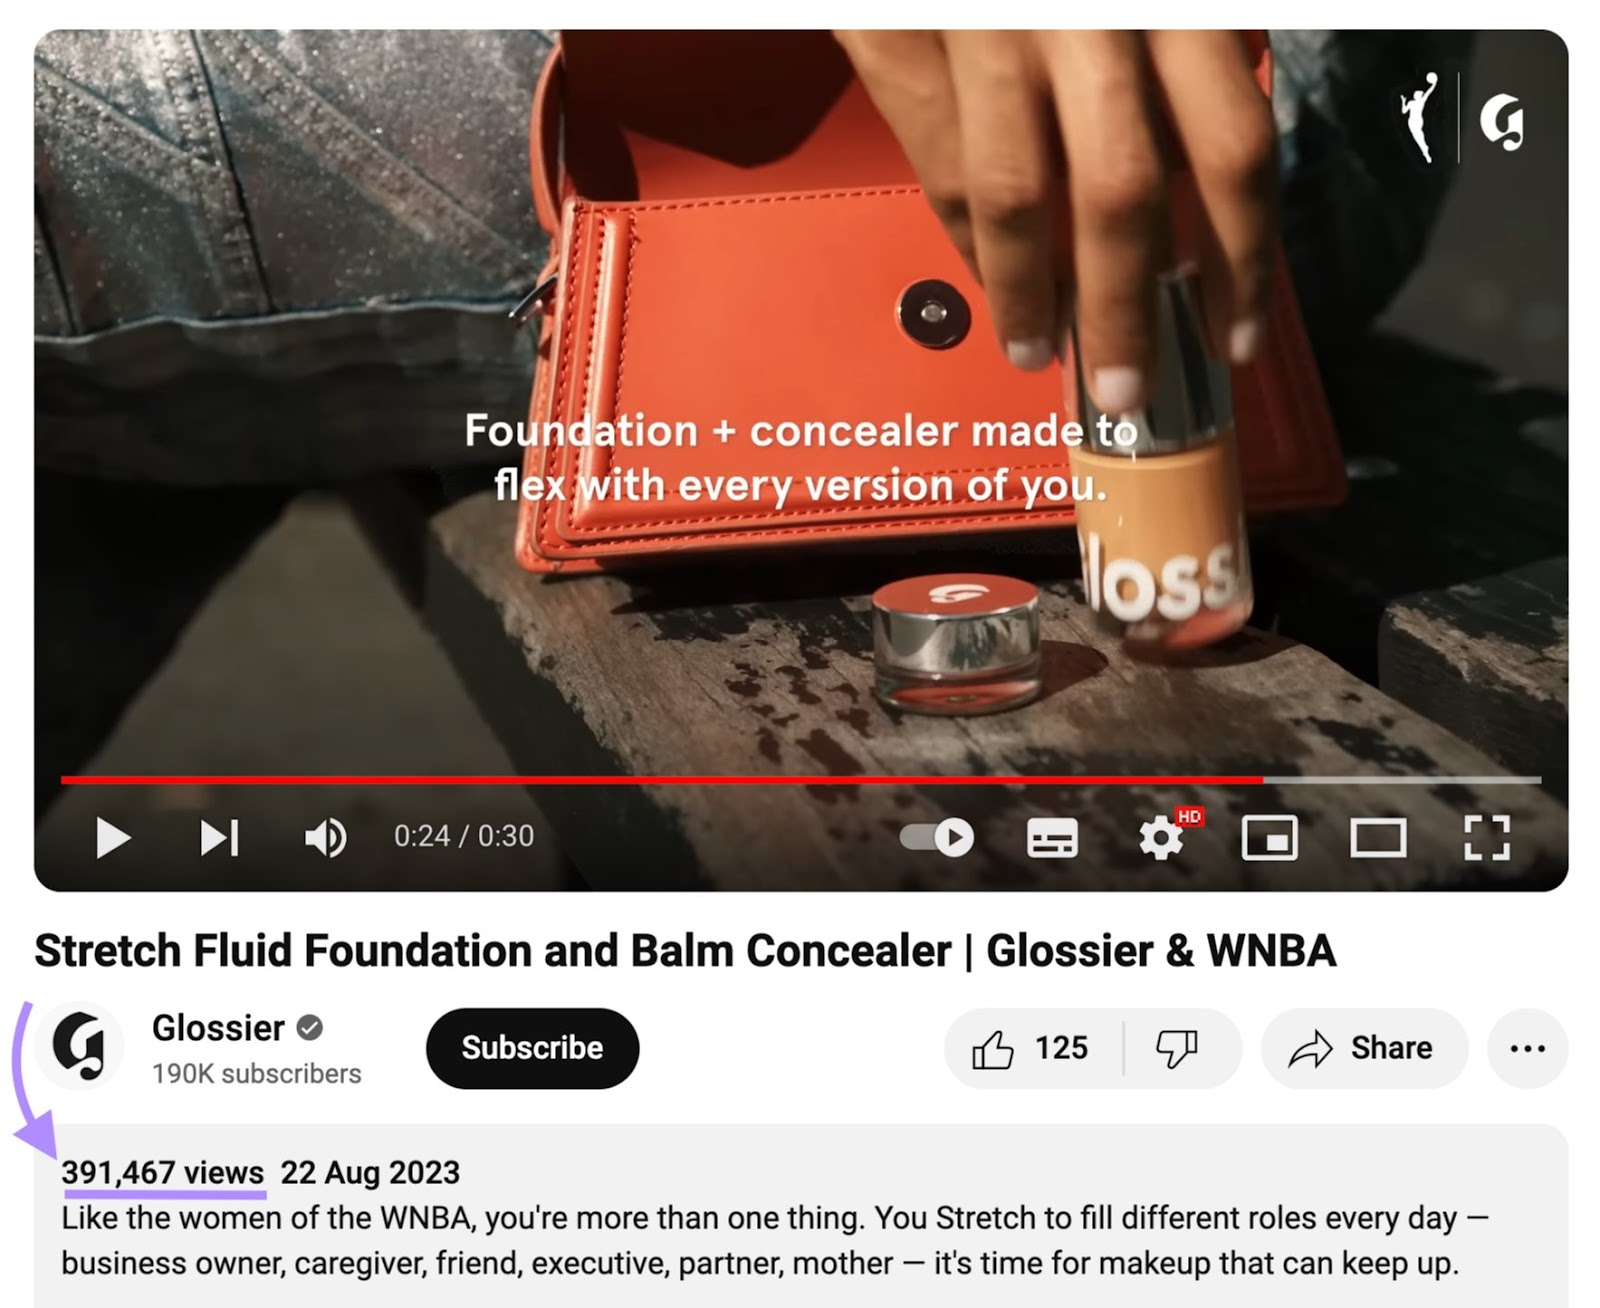 Glossier's video connected  YouTube promoting its instauration  and concealer